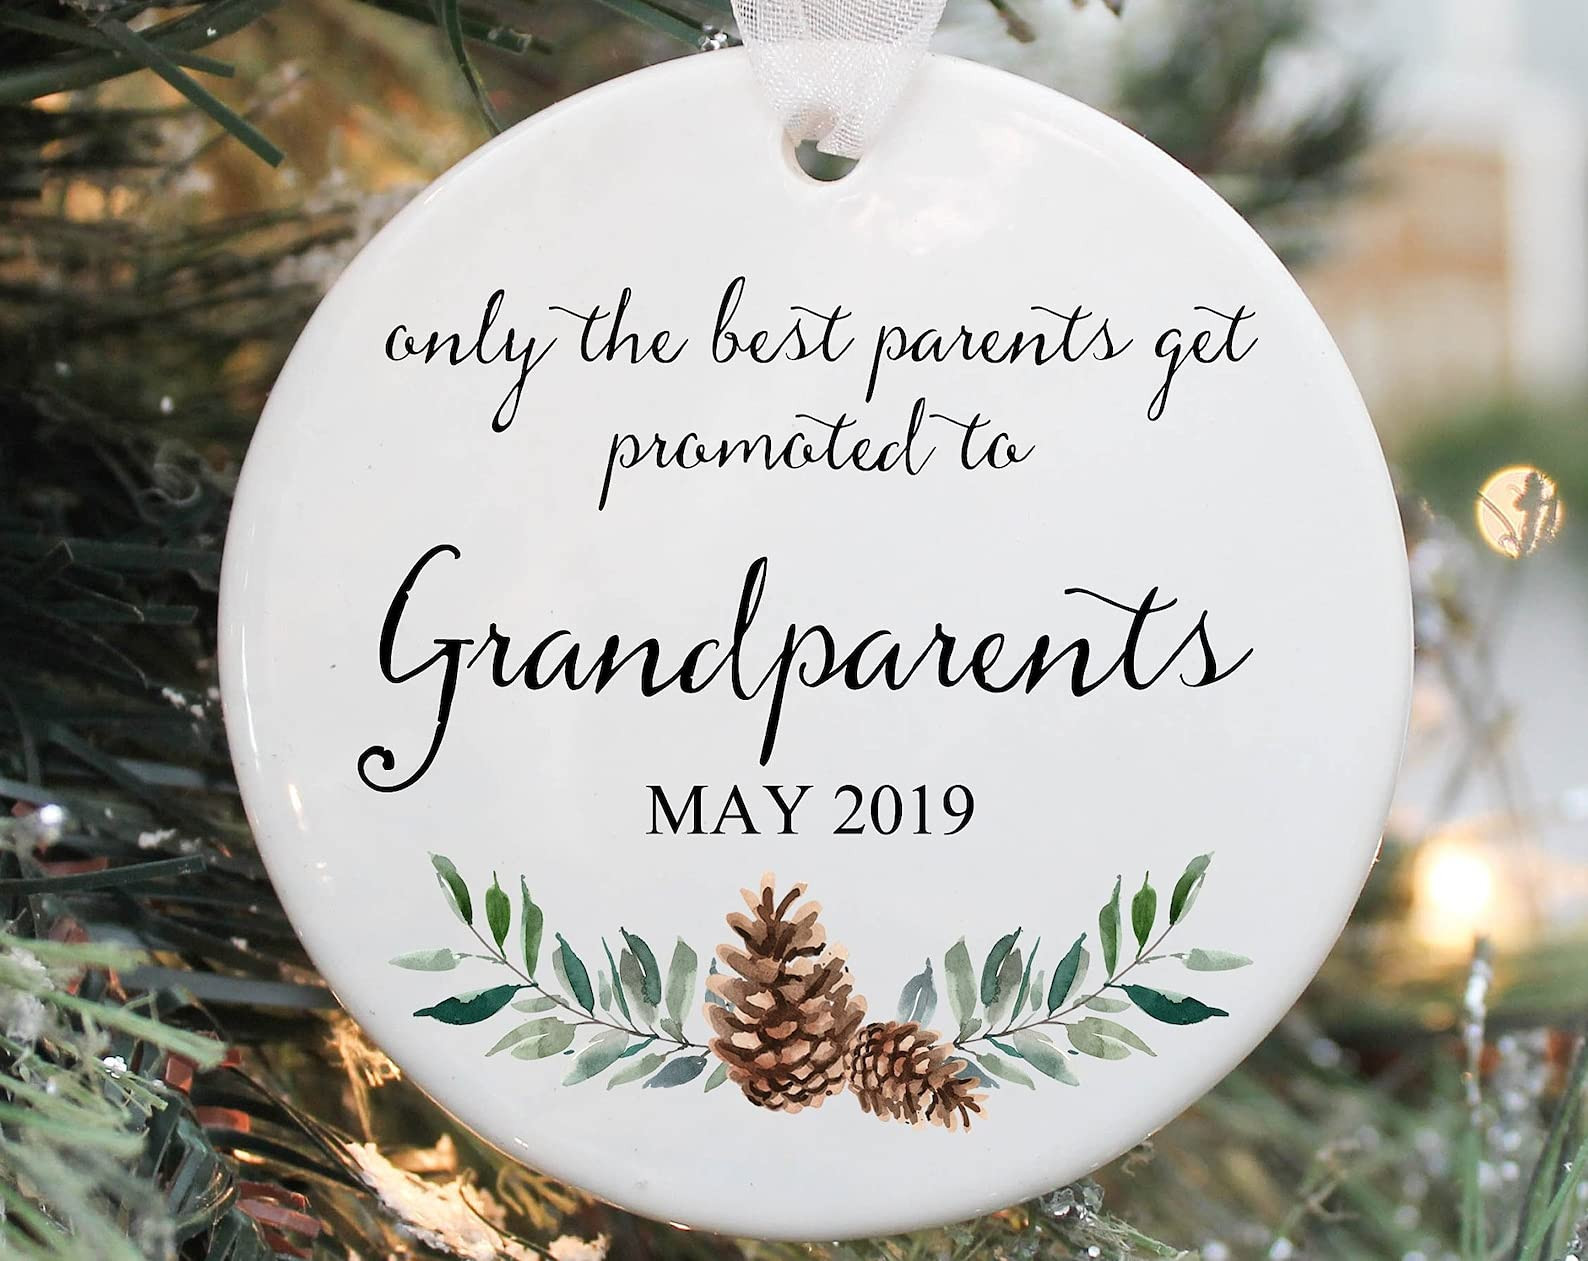 Customized Only The Best Parents Get Promoted To Grandparents Pregnancy Ornament Gifts For Family Parents From Children Son Daughter On Christmas Wedding Occasion